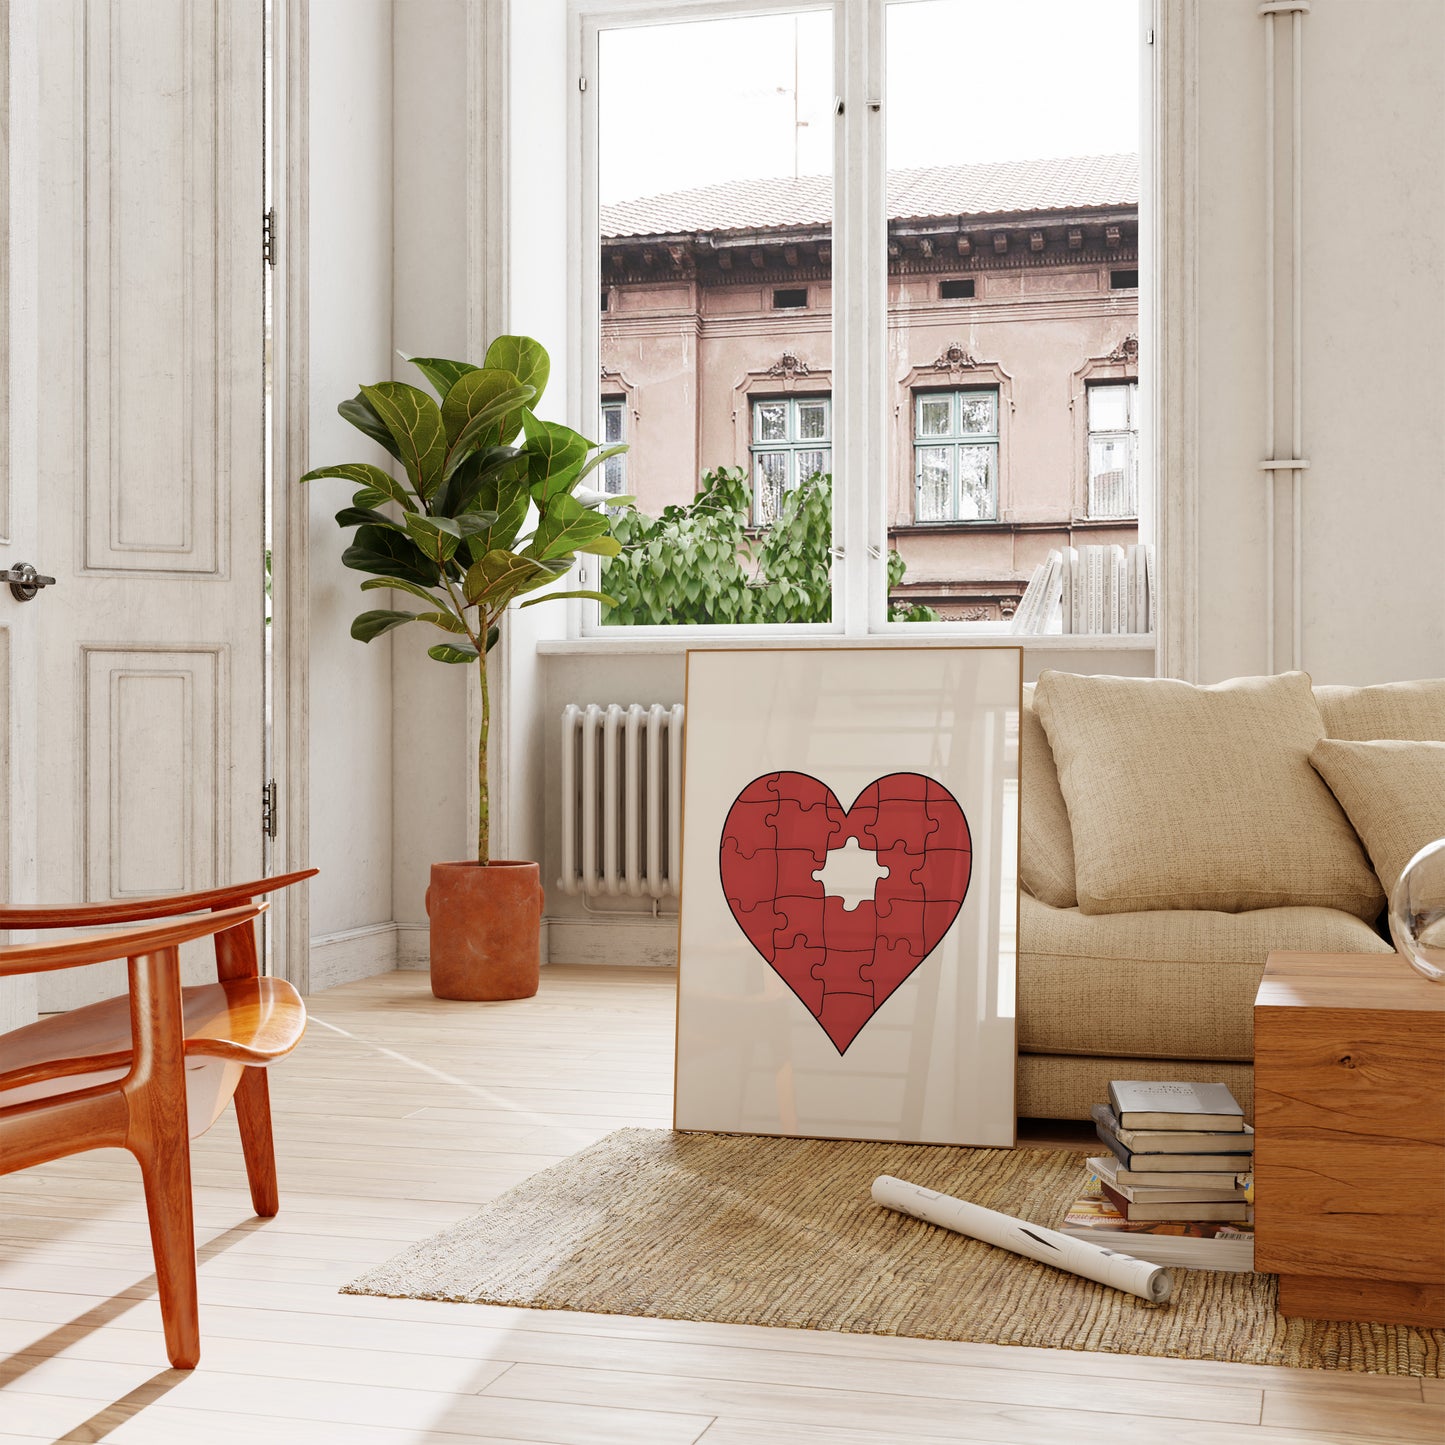 Modern living room with a jigsaw puzzle heart artwork leaning against the wall.